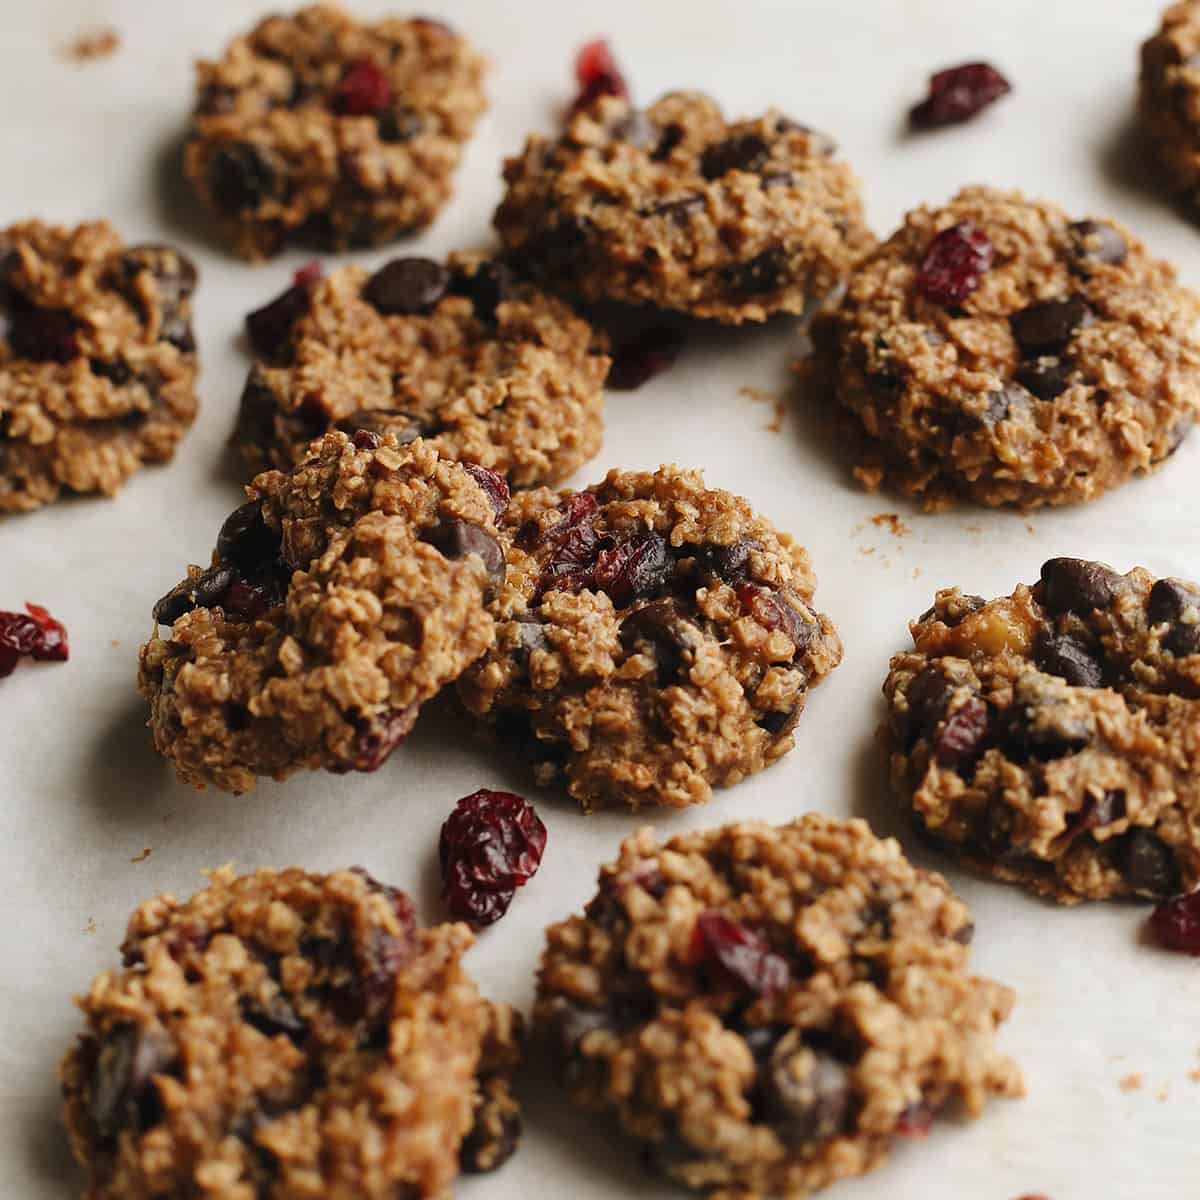 10 Peanut Butter Banana Cookies with chocolate chips and dried cranberries